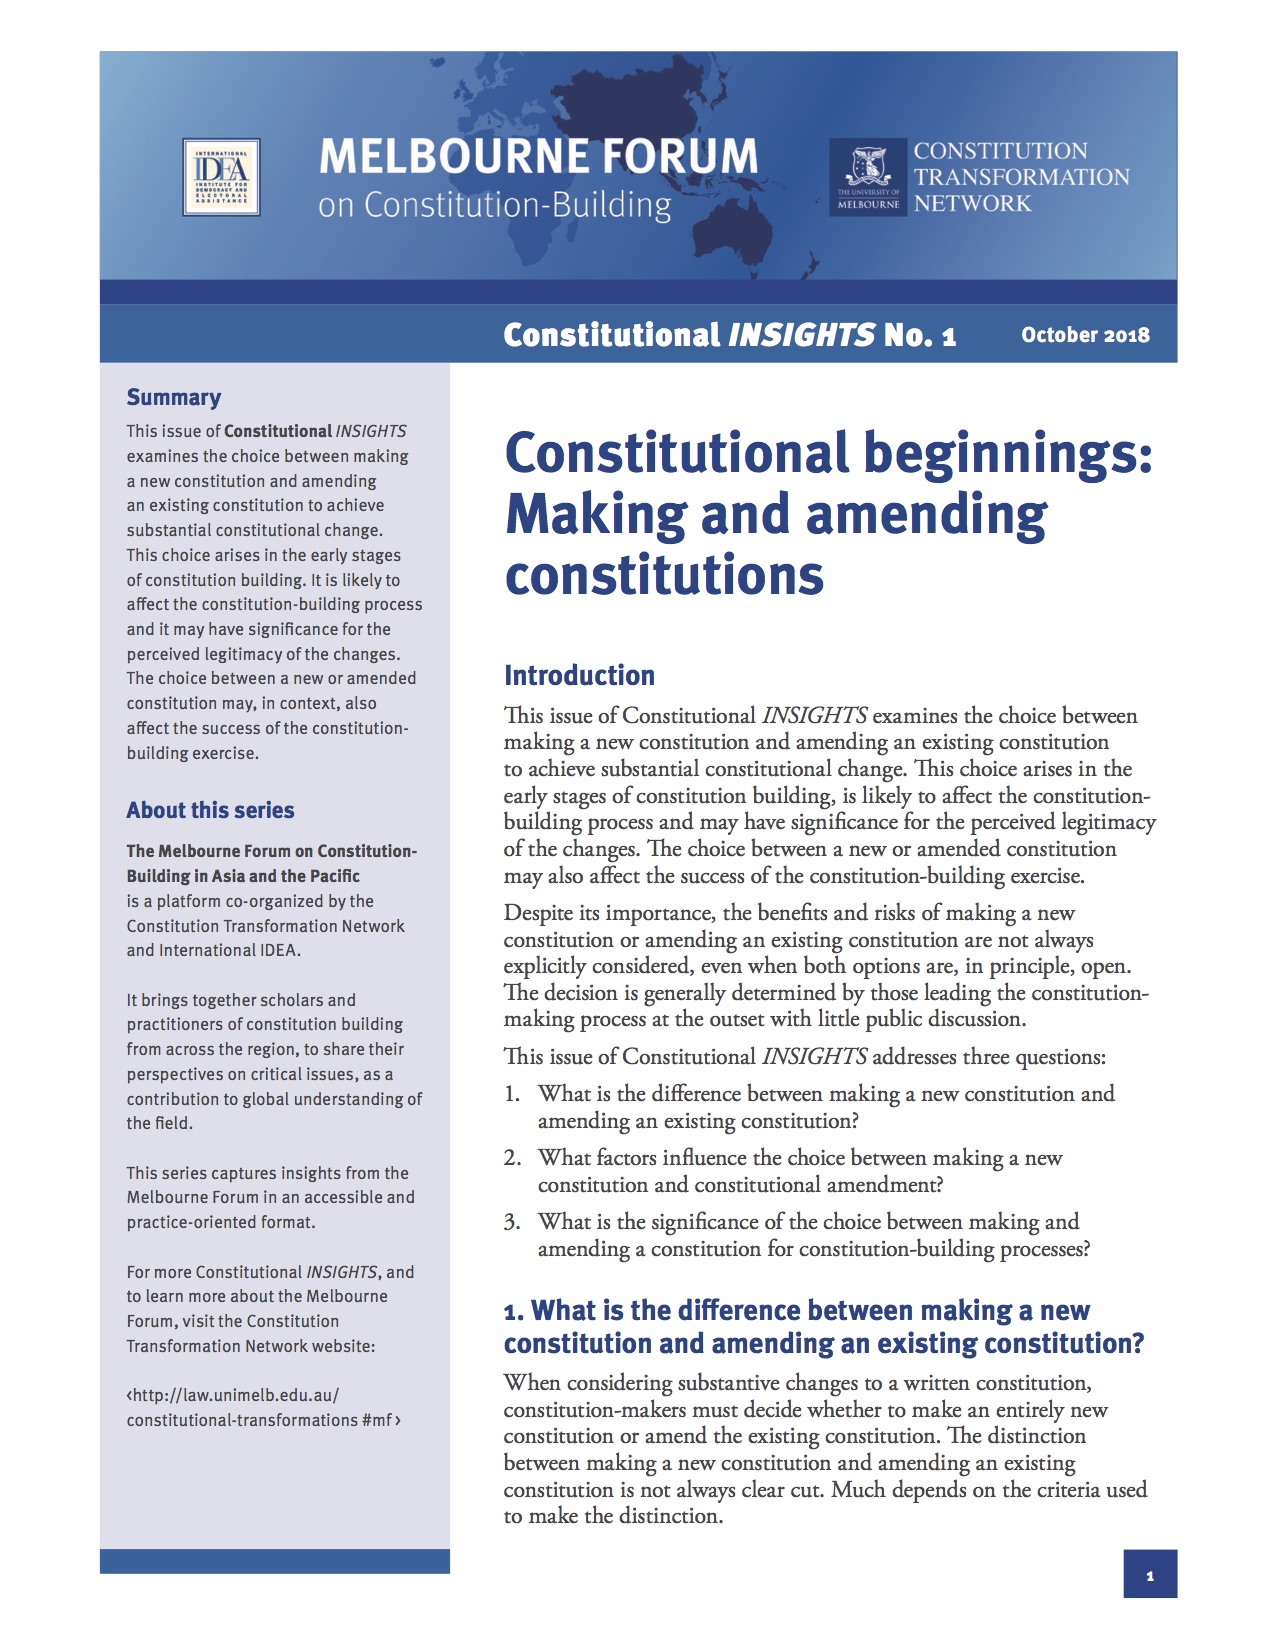 Constitutional beginnings: Making and amending constitutions